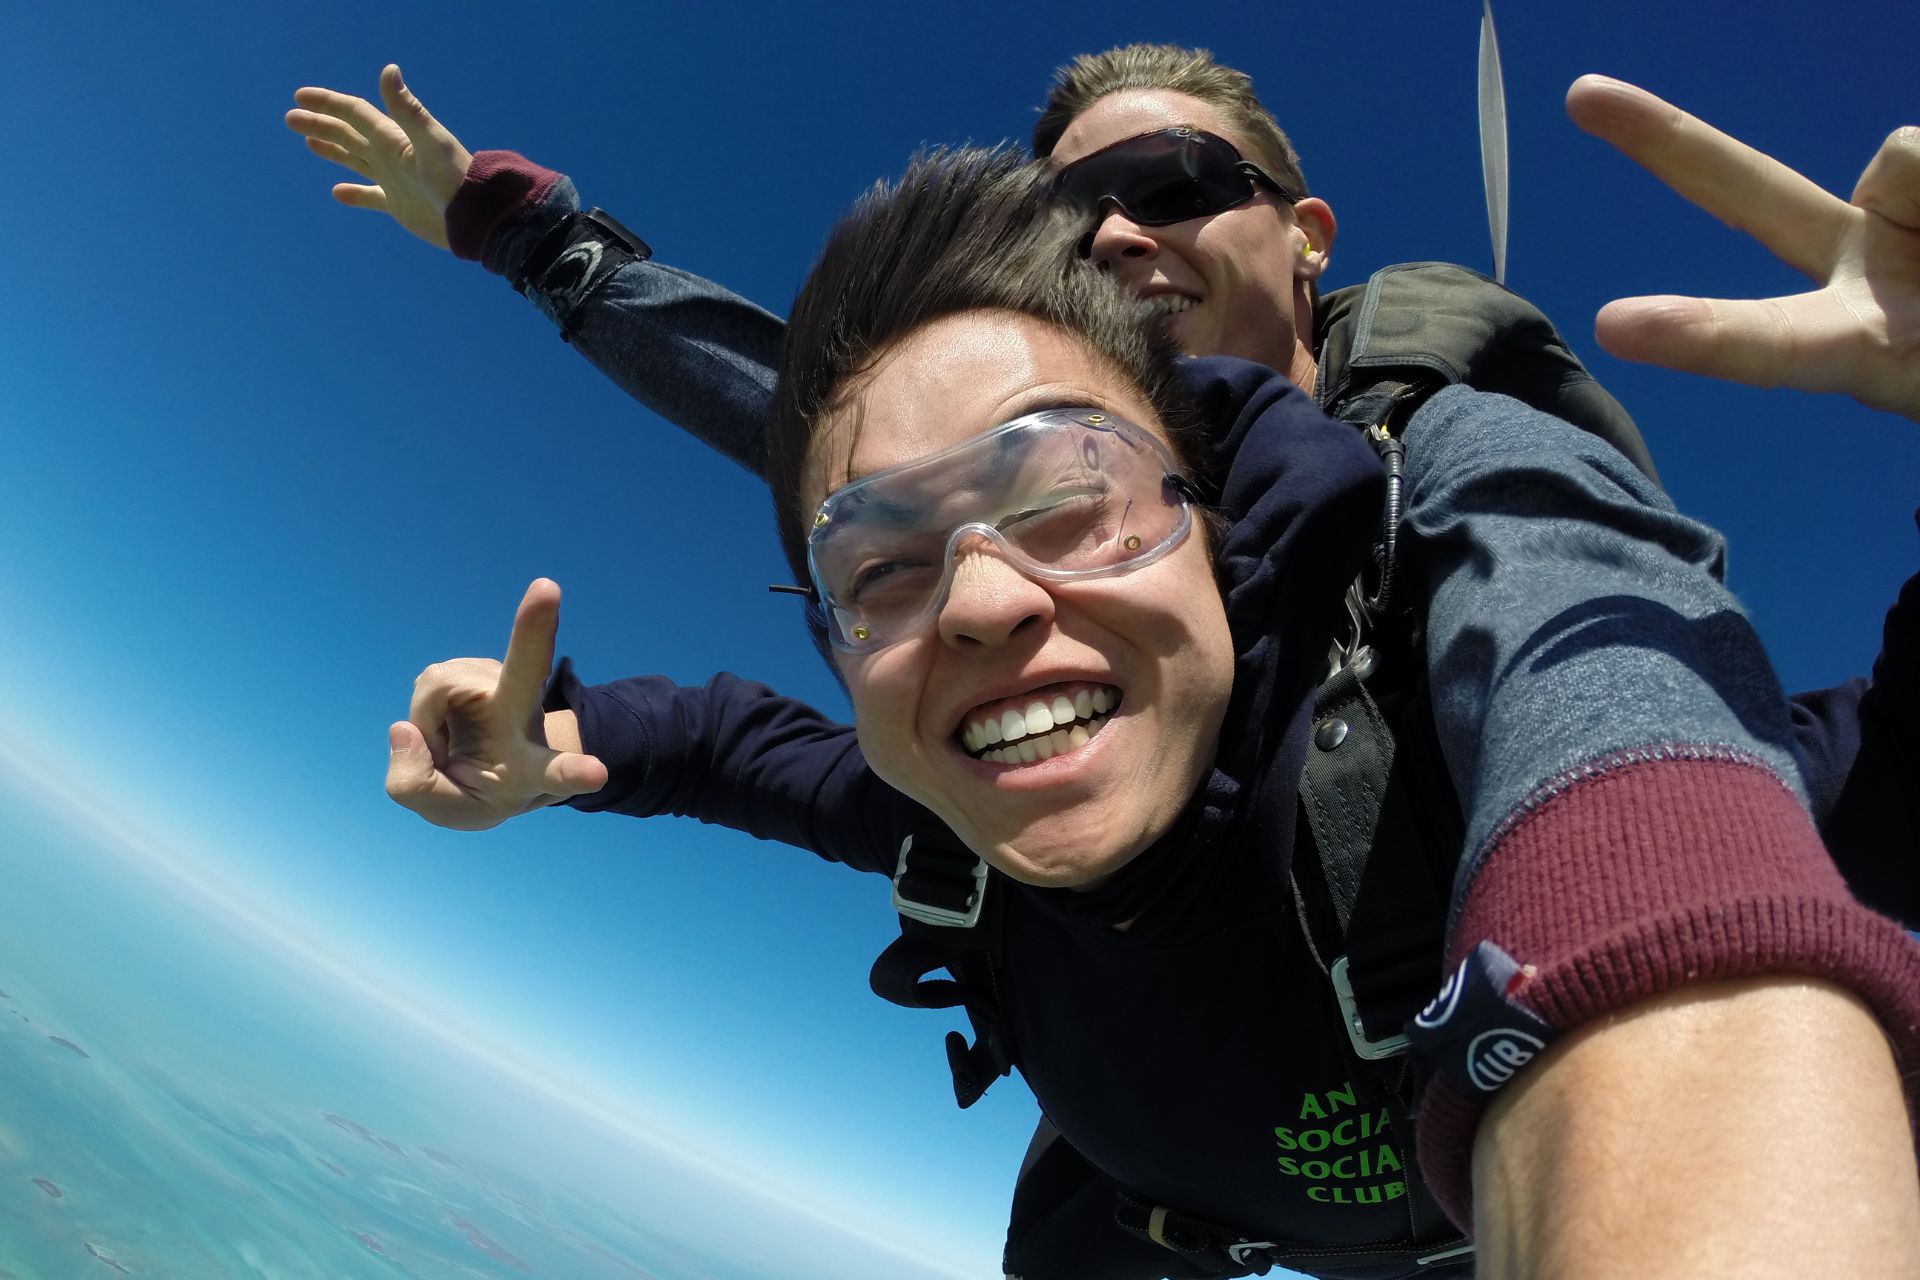 Smiling tandem skydiving student holds up two fingers on each hand during freefall to show peace signs.